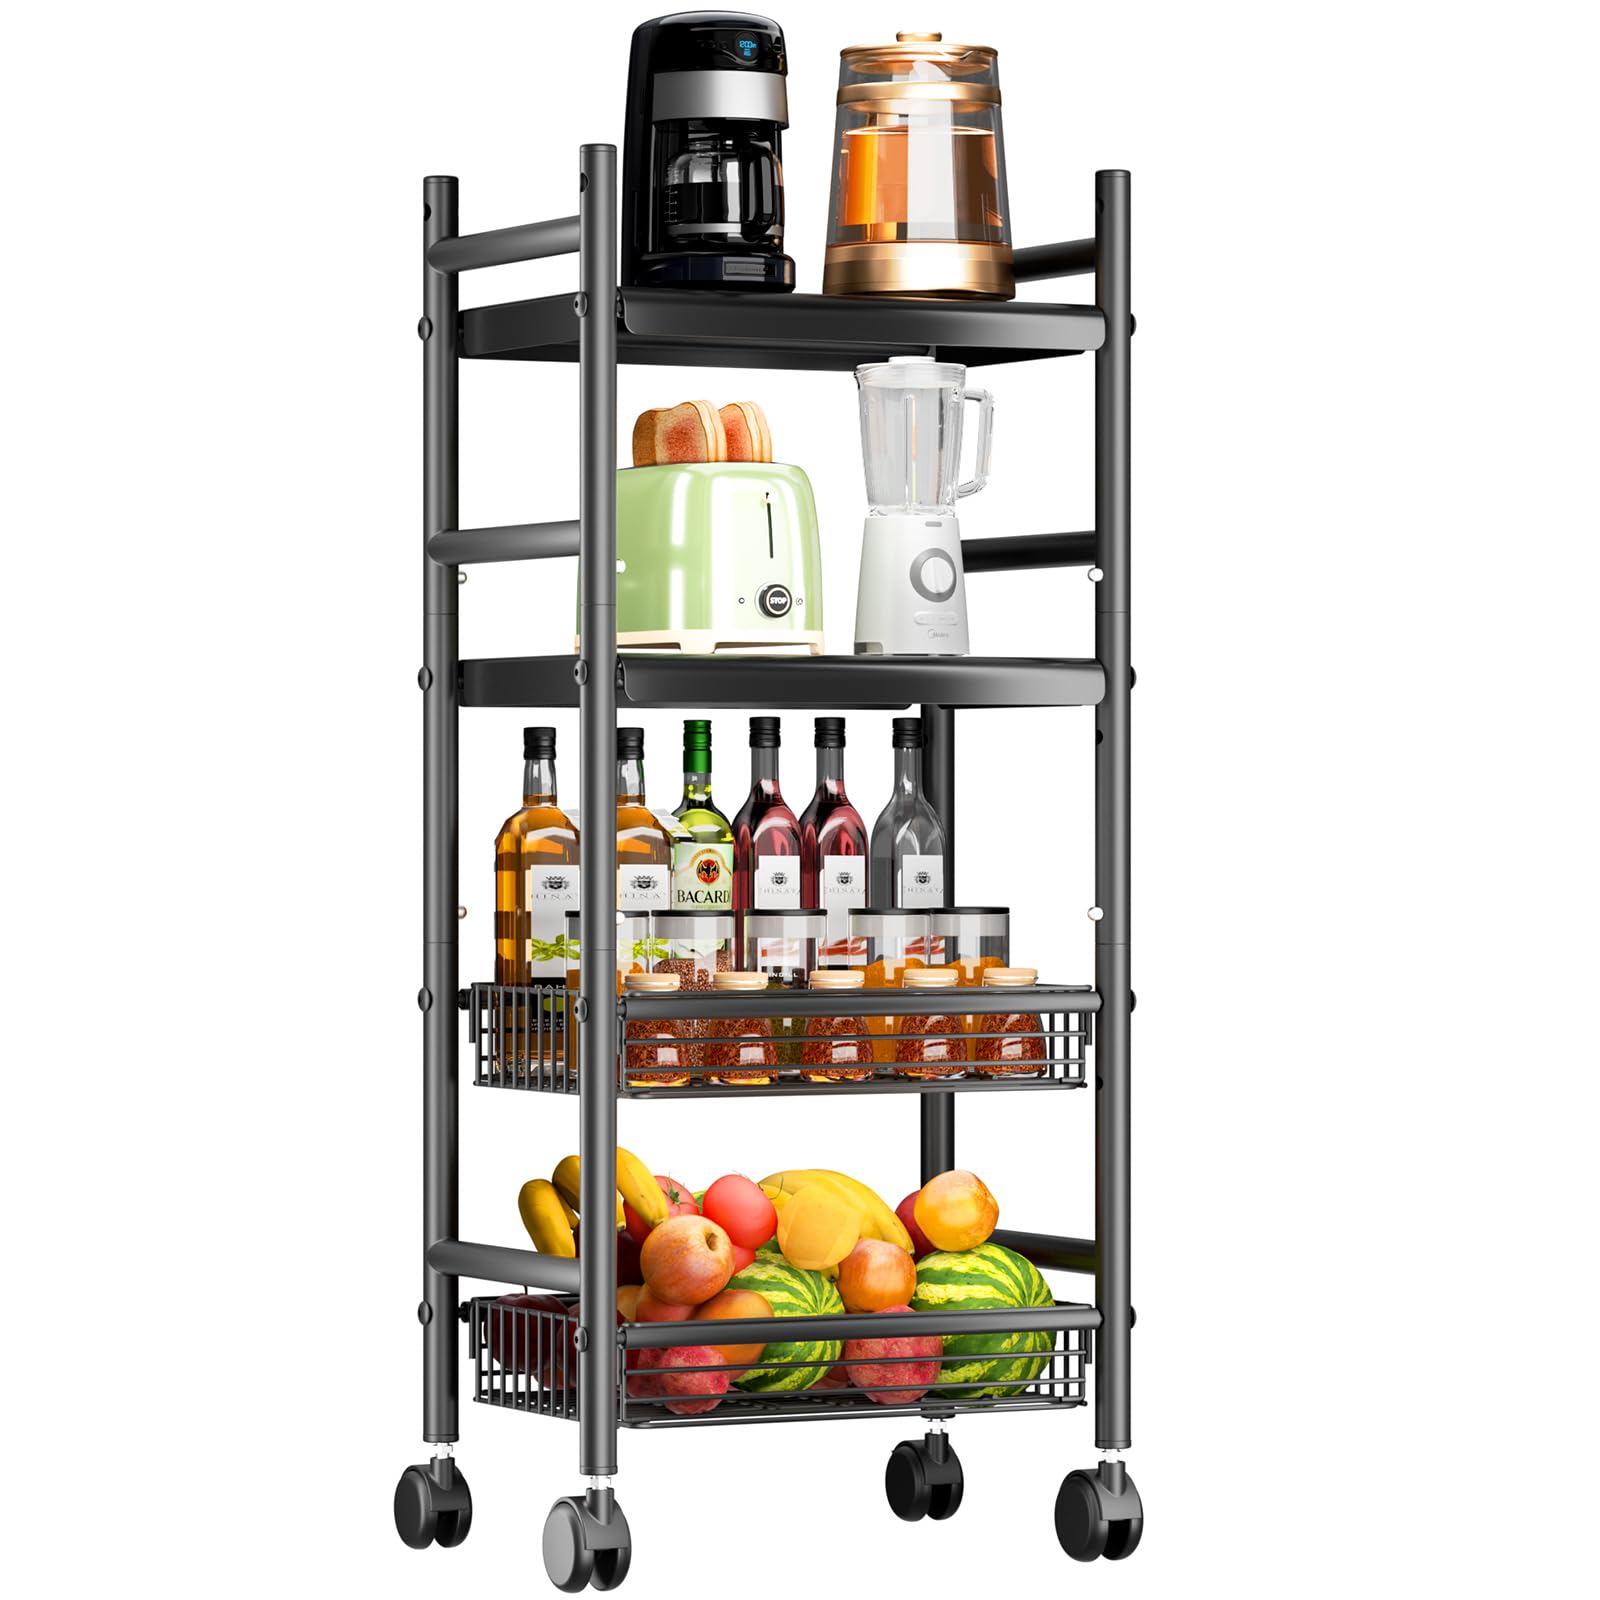 caktraie 4 Tier Rolling Cart, Kitchen Carts on Wheels with Storage and Steel Frame, Multifunctional Utility Cart with Wheels for Kitchen, Bathroom, Living Room, Bar, Office